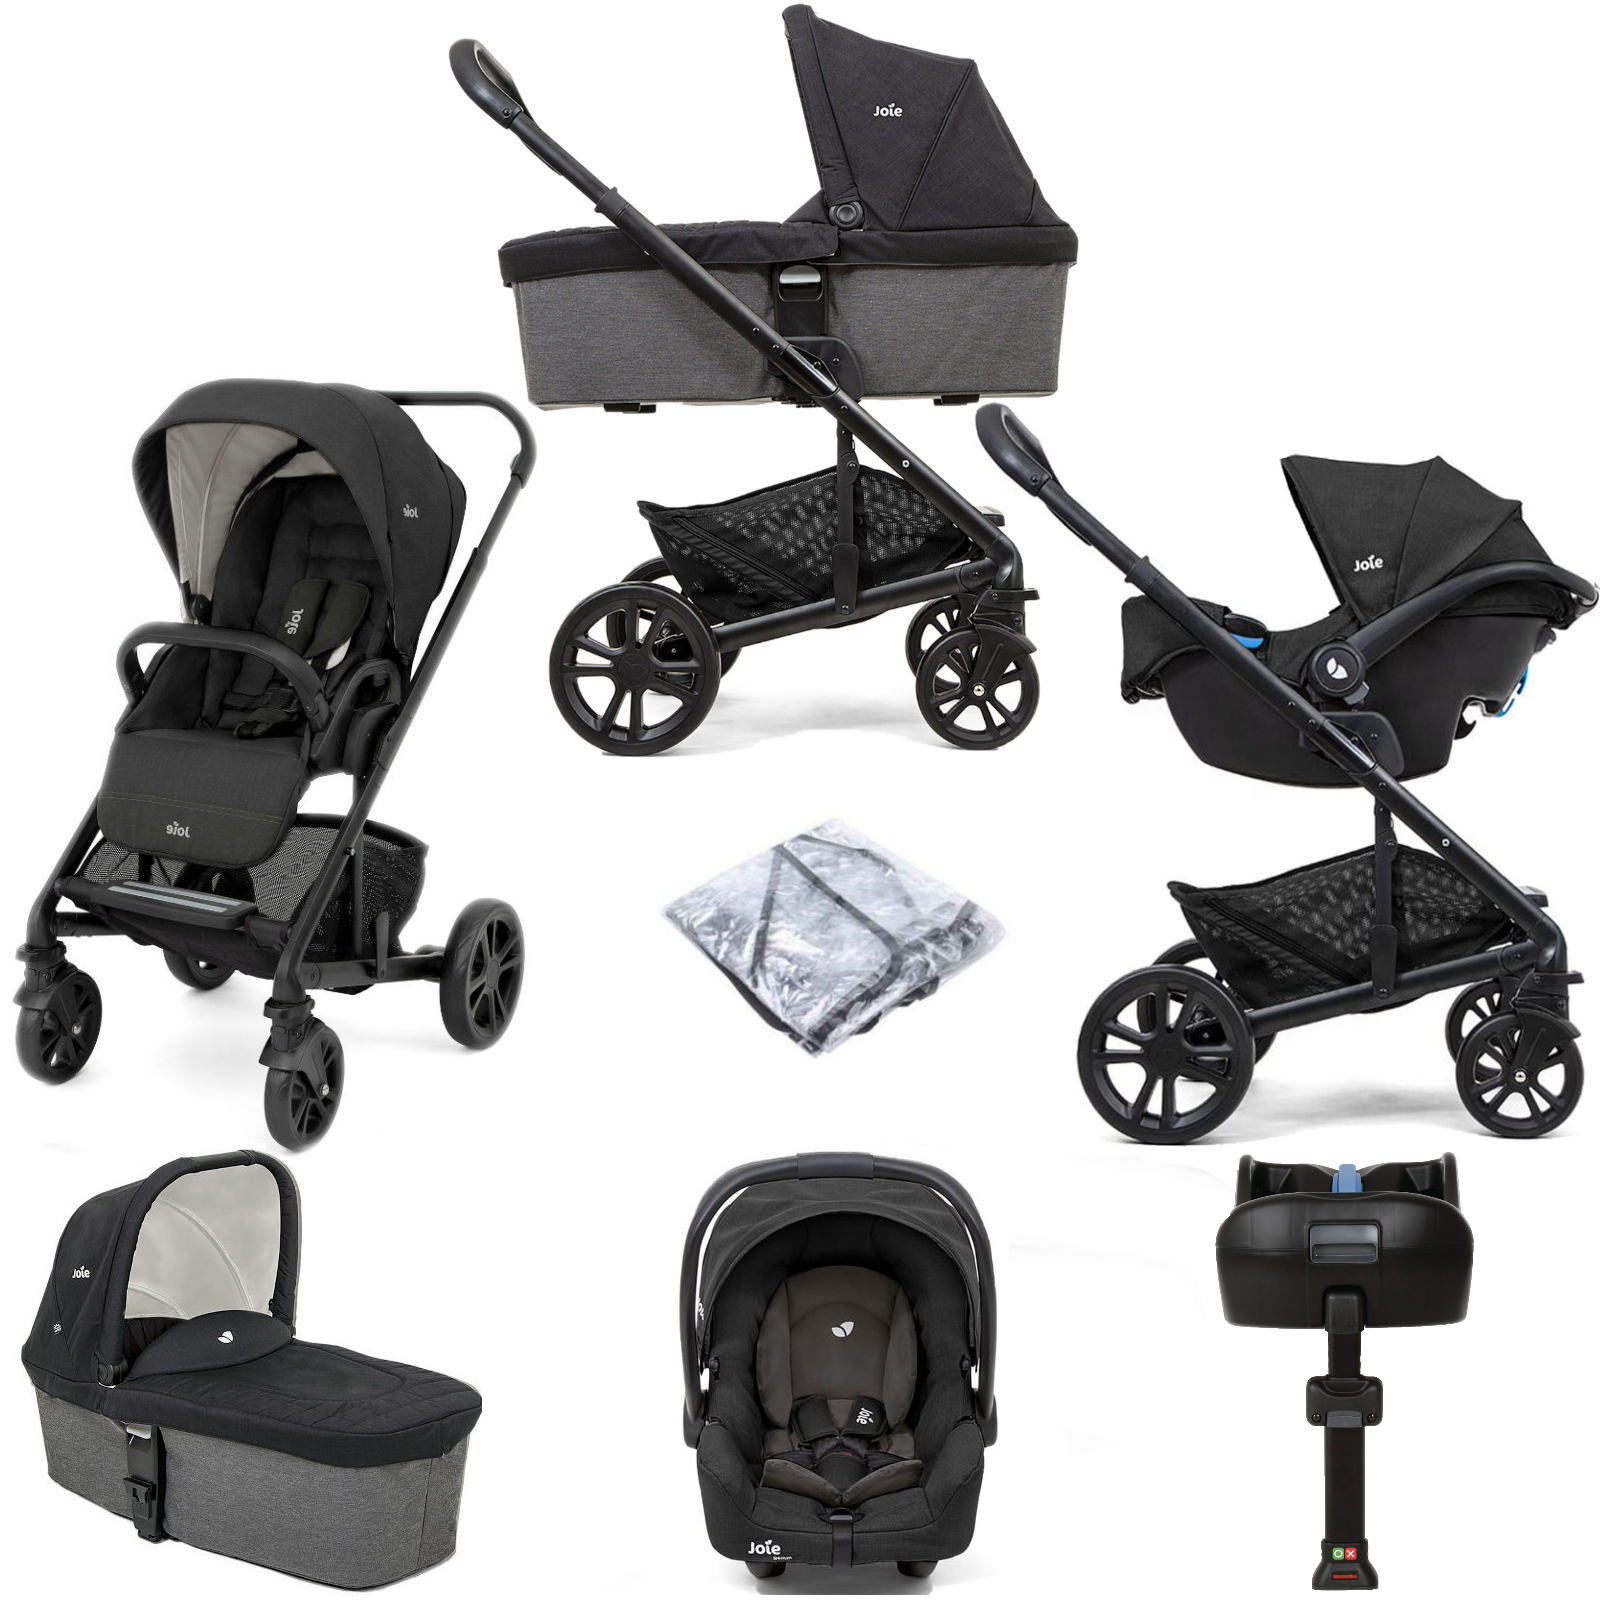 Joie Chrome (Gemm) Travel System with Carrycot & ISOFIX Base - Shale | Buy at Online4baby